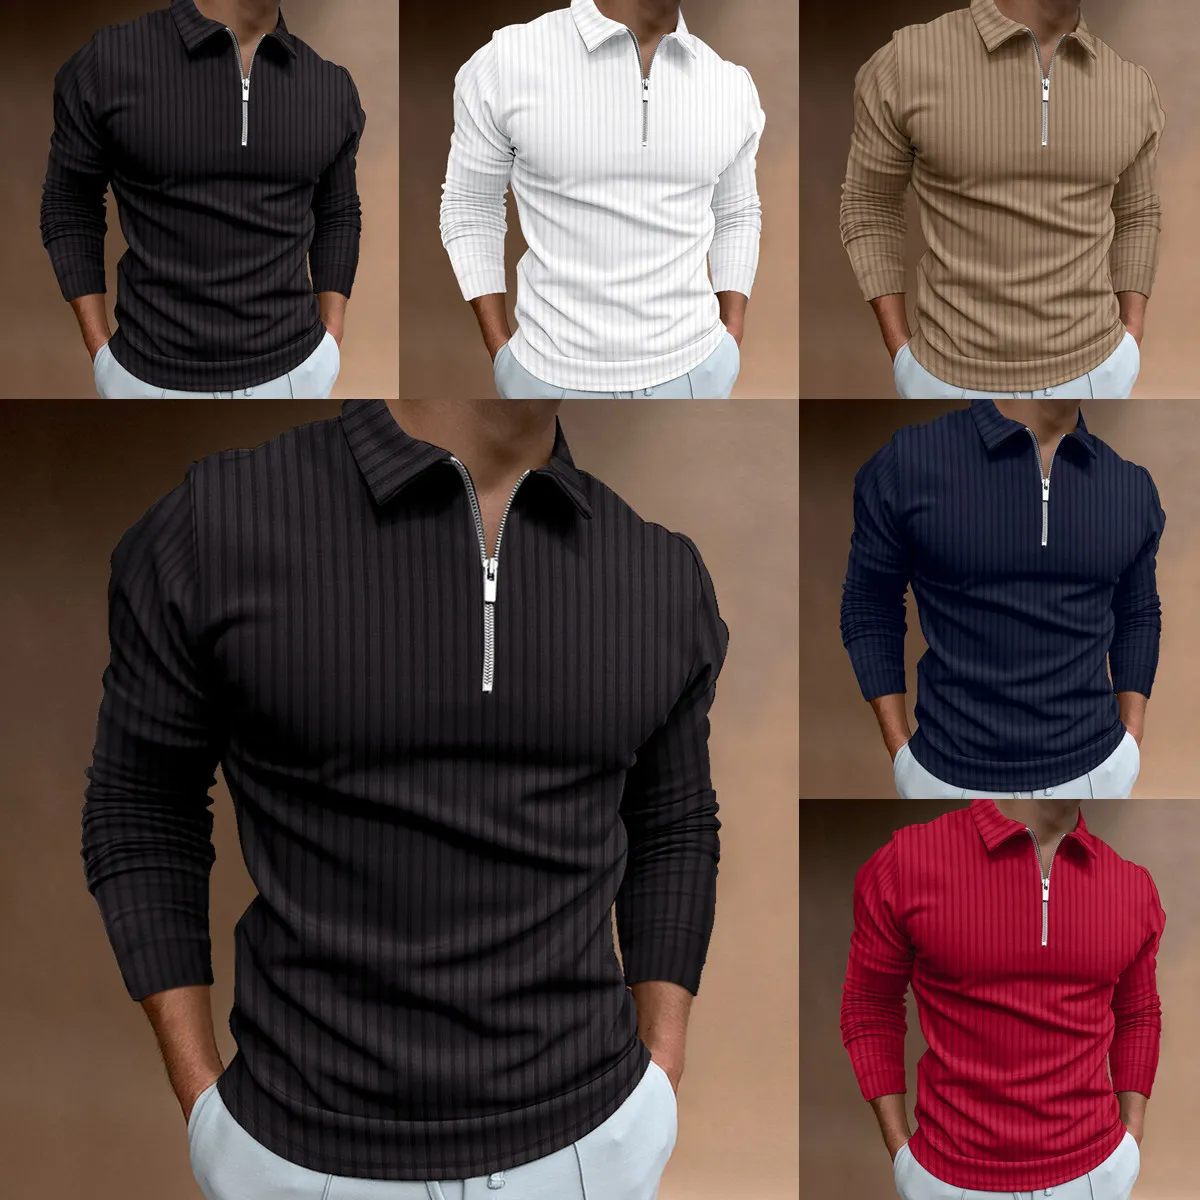 High Quality Spring Luxury Italy Men T-Shirt Designer Polo Shirts High Street Embroidery Small Horse Striped Long Sleeve Men's Clothing Brand Polo Shirt size S-3XL